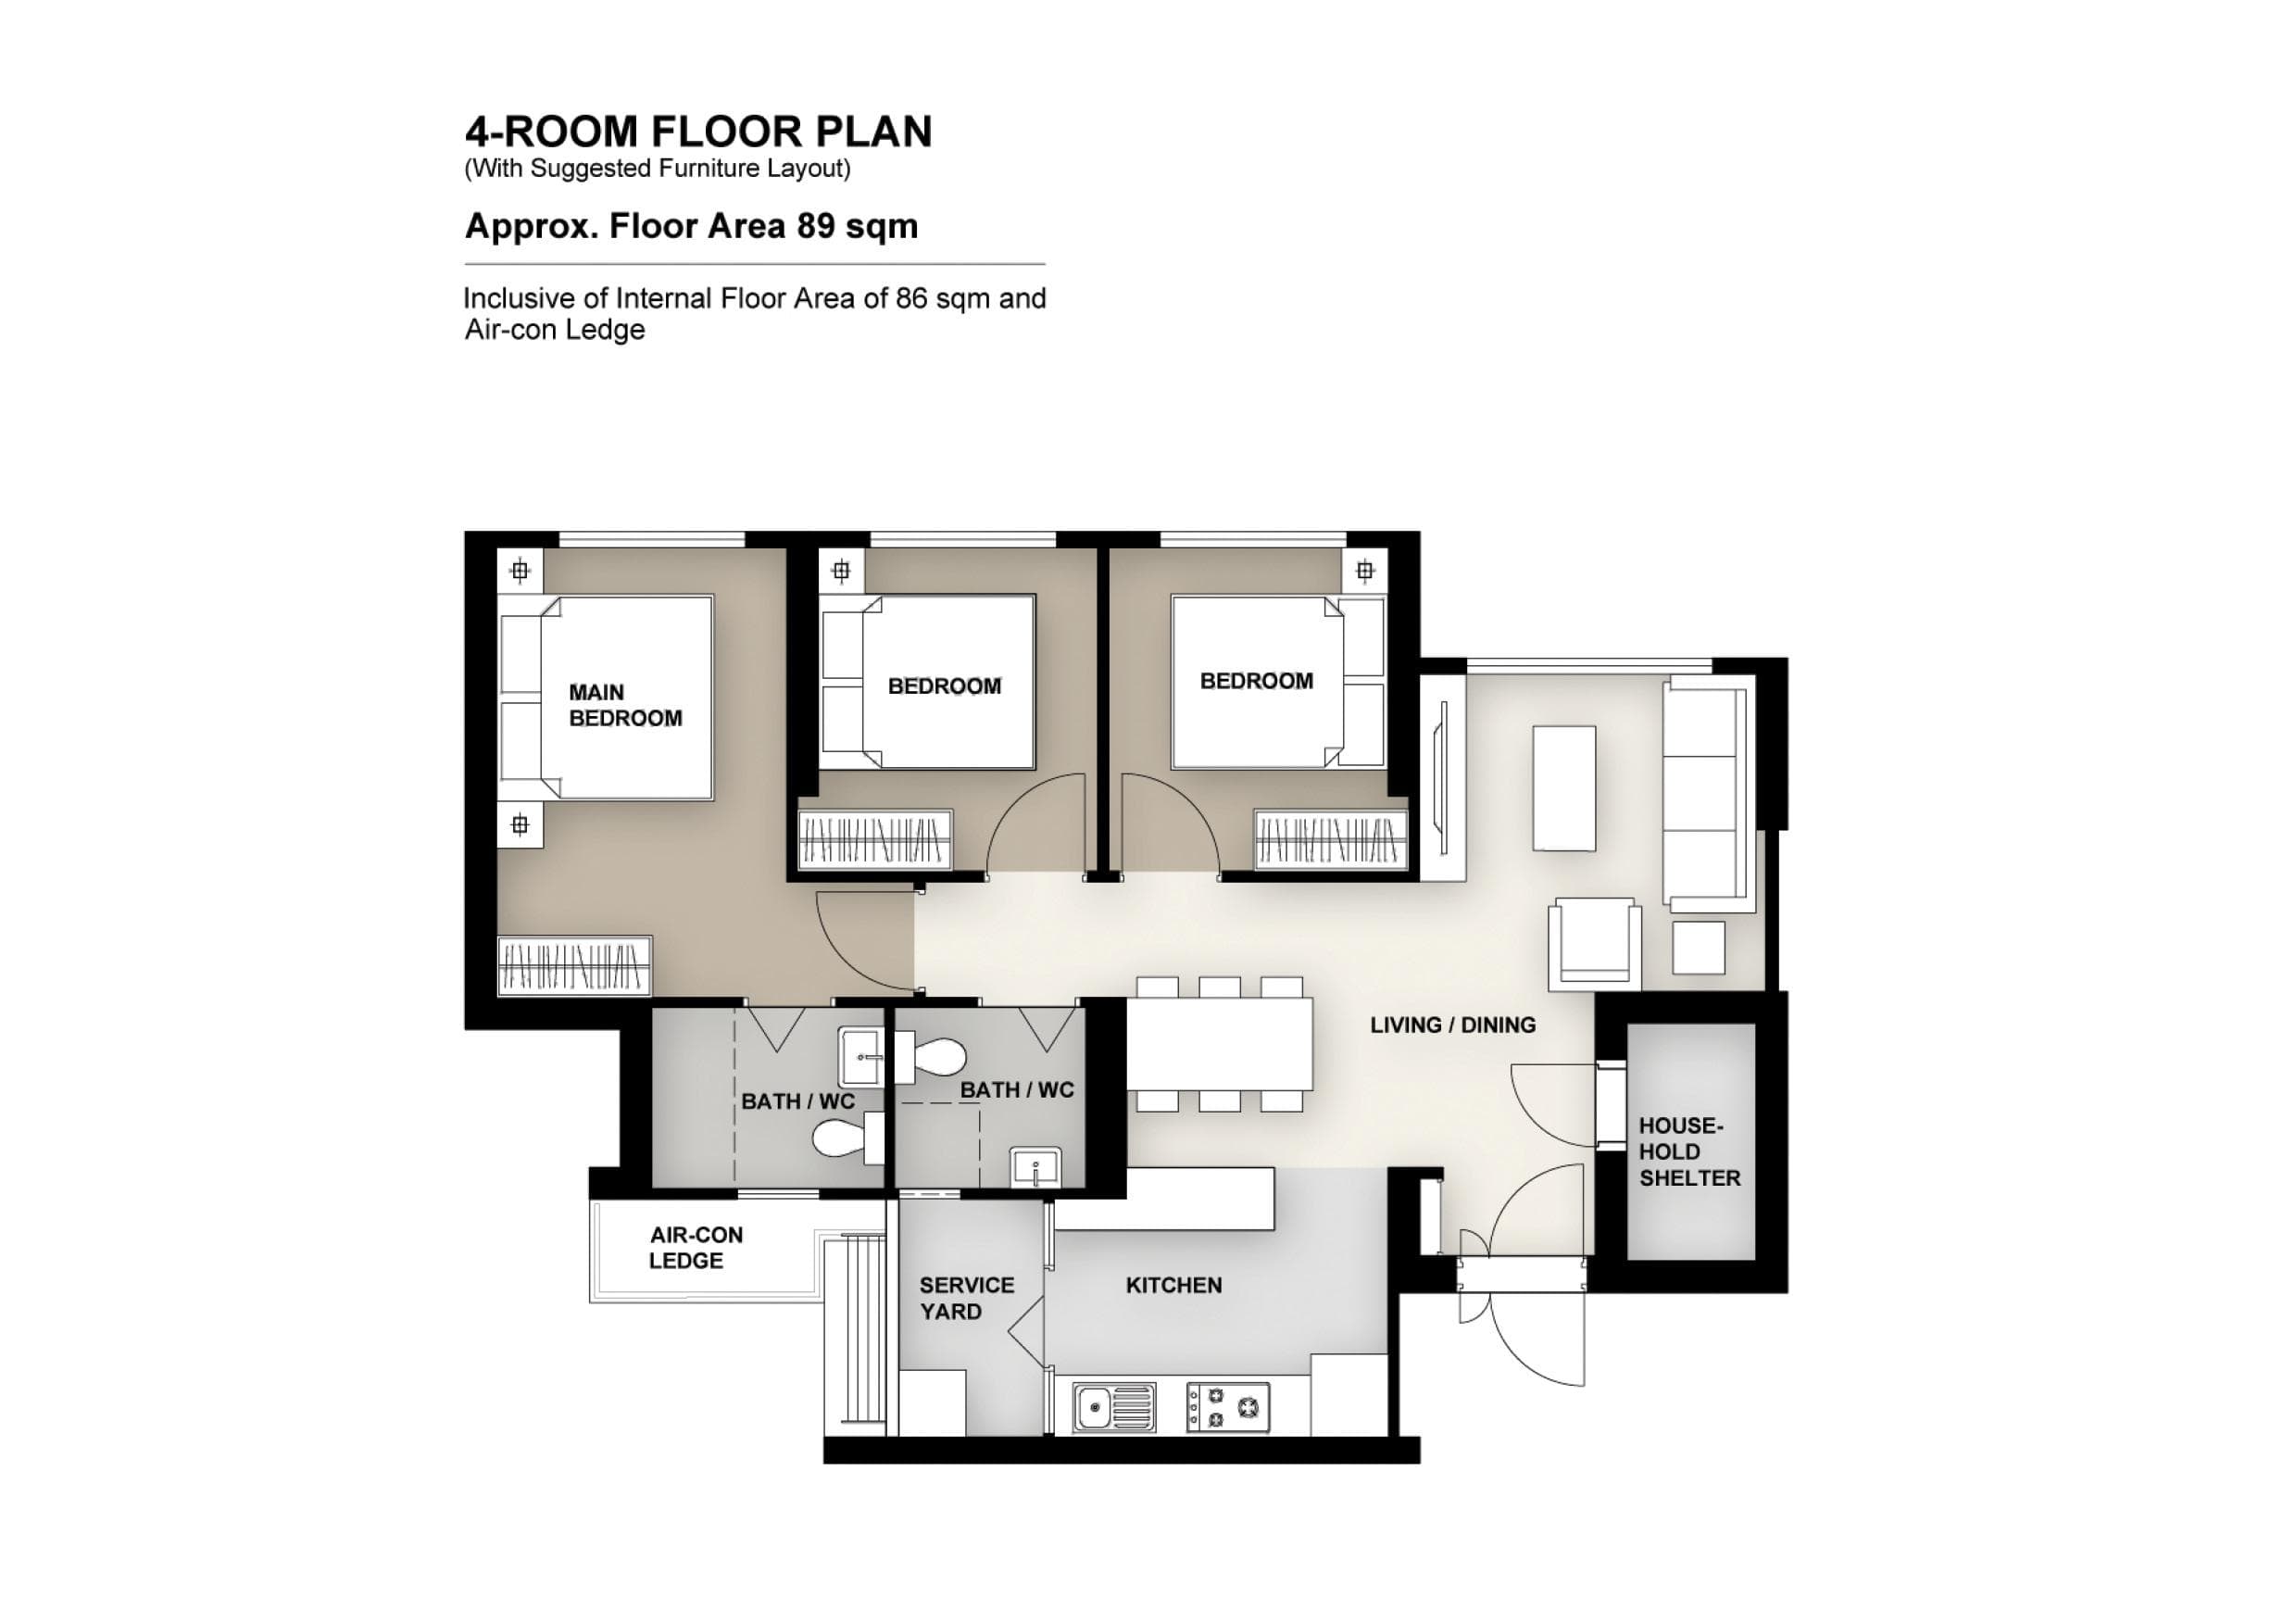 Ghim Moh Ascent 4 Room Flat